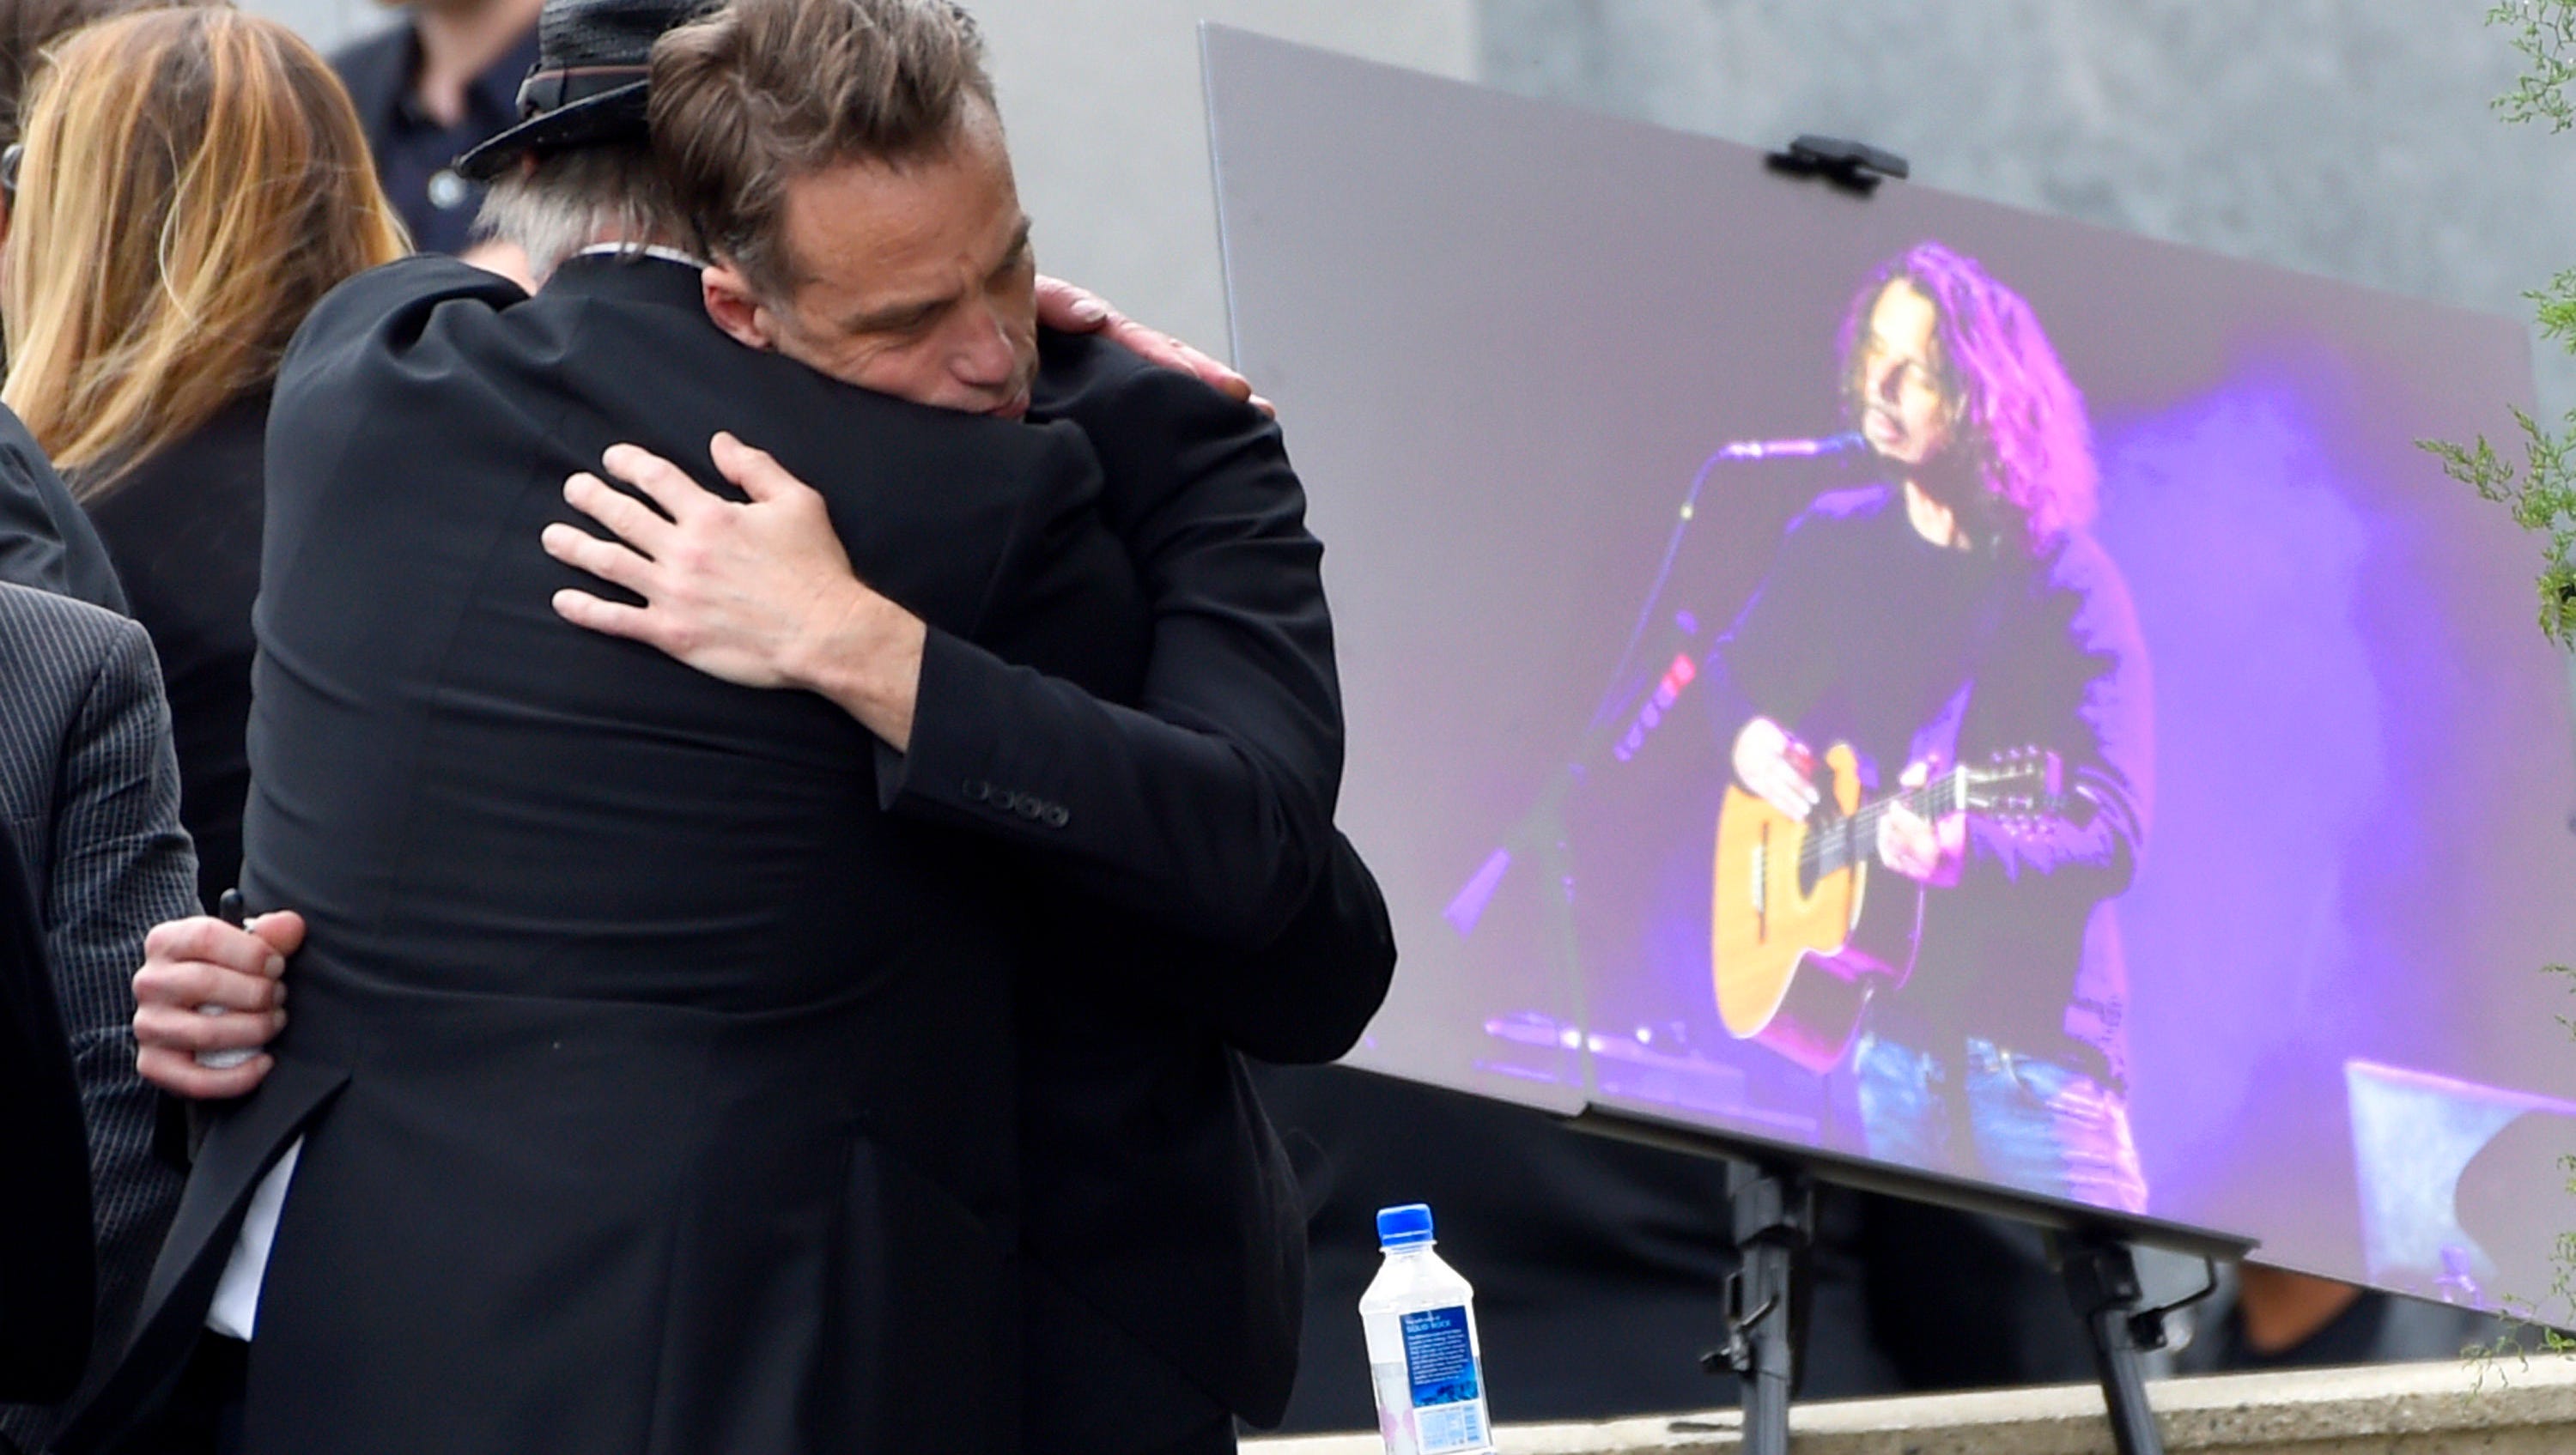 Matt Cameron, of Soundgarden, right, hugs a guest at a funeral for Chris Cornell, pictured right, at the Hollywood Forever Cemetery.